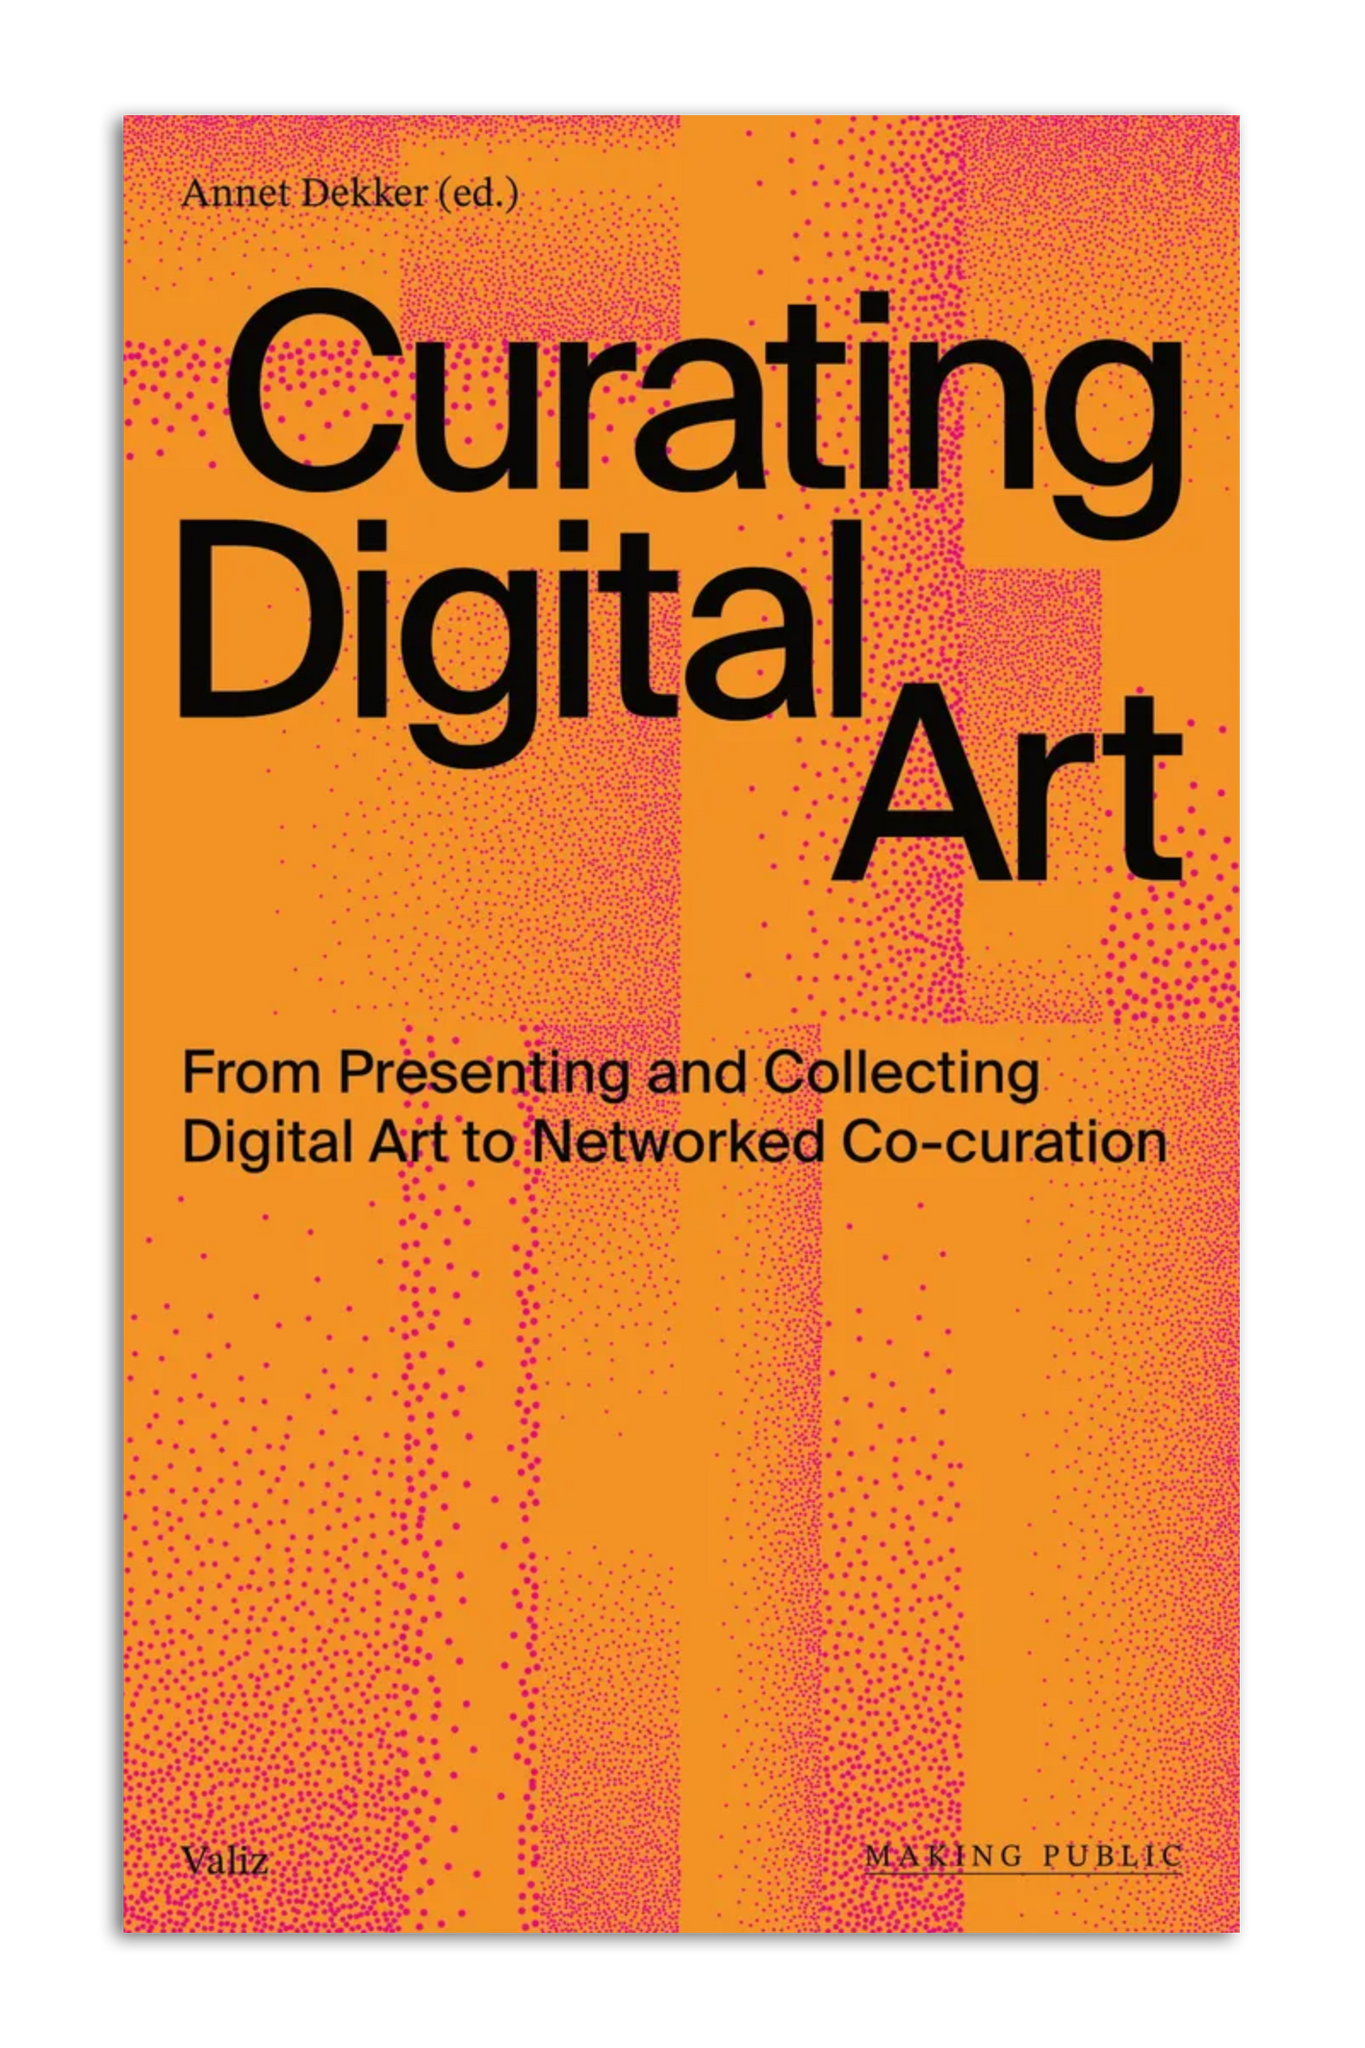 Curating Digital Art - From Presenting and Collecting Digital Art to Networked Co-curation